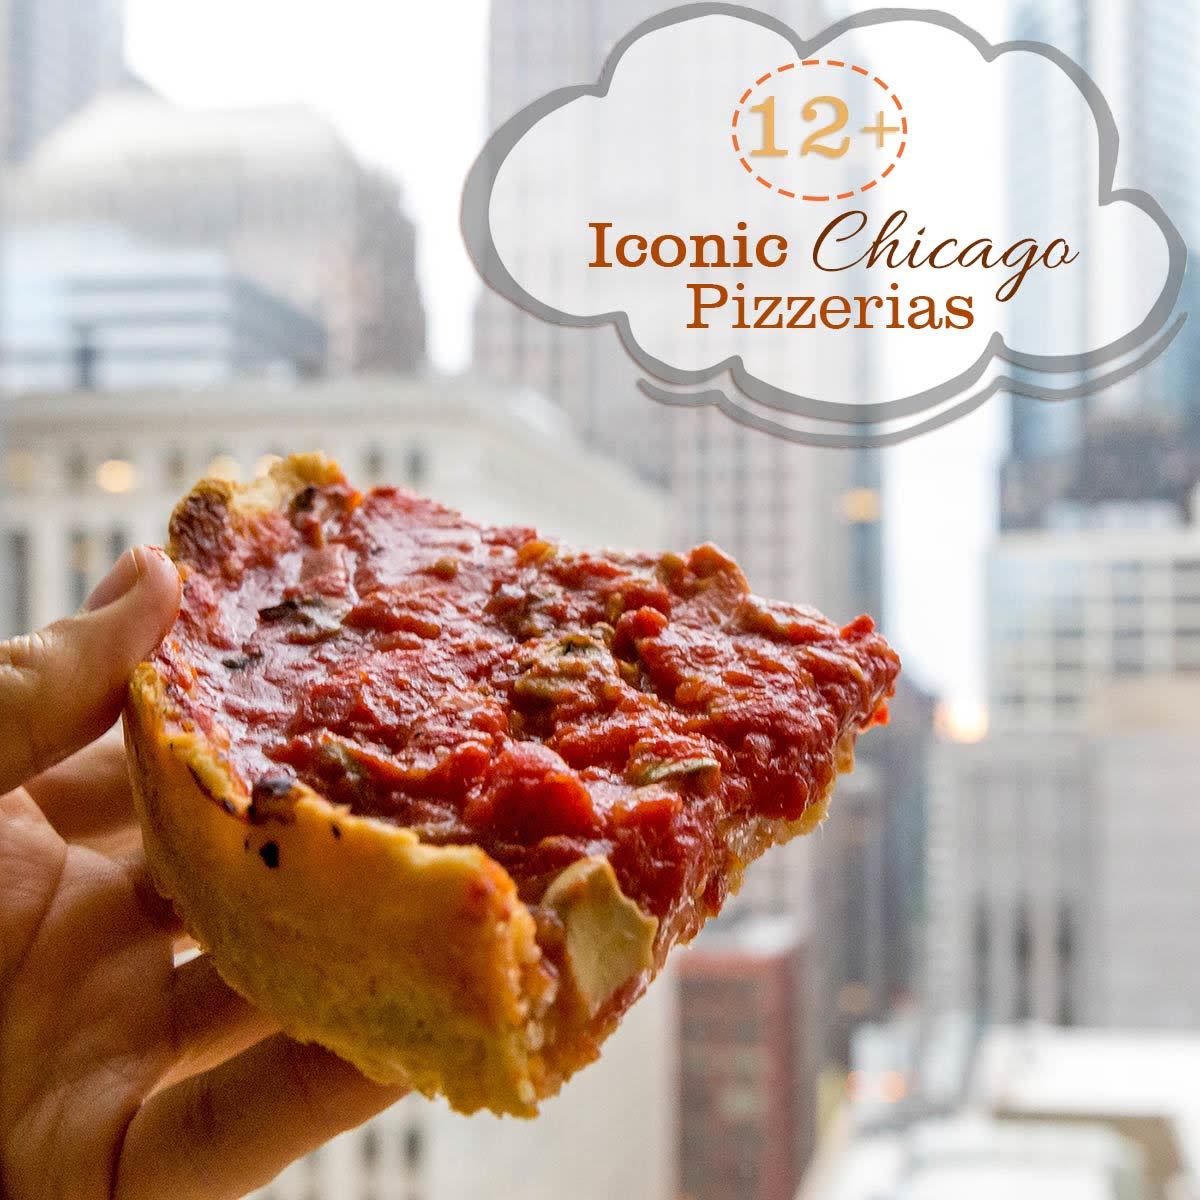 Want the Best Chicago Pizza? Try These 12+ Iconic Pizzerias